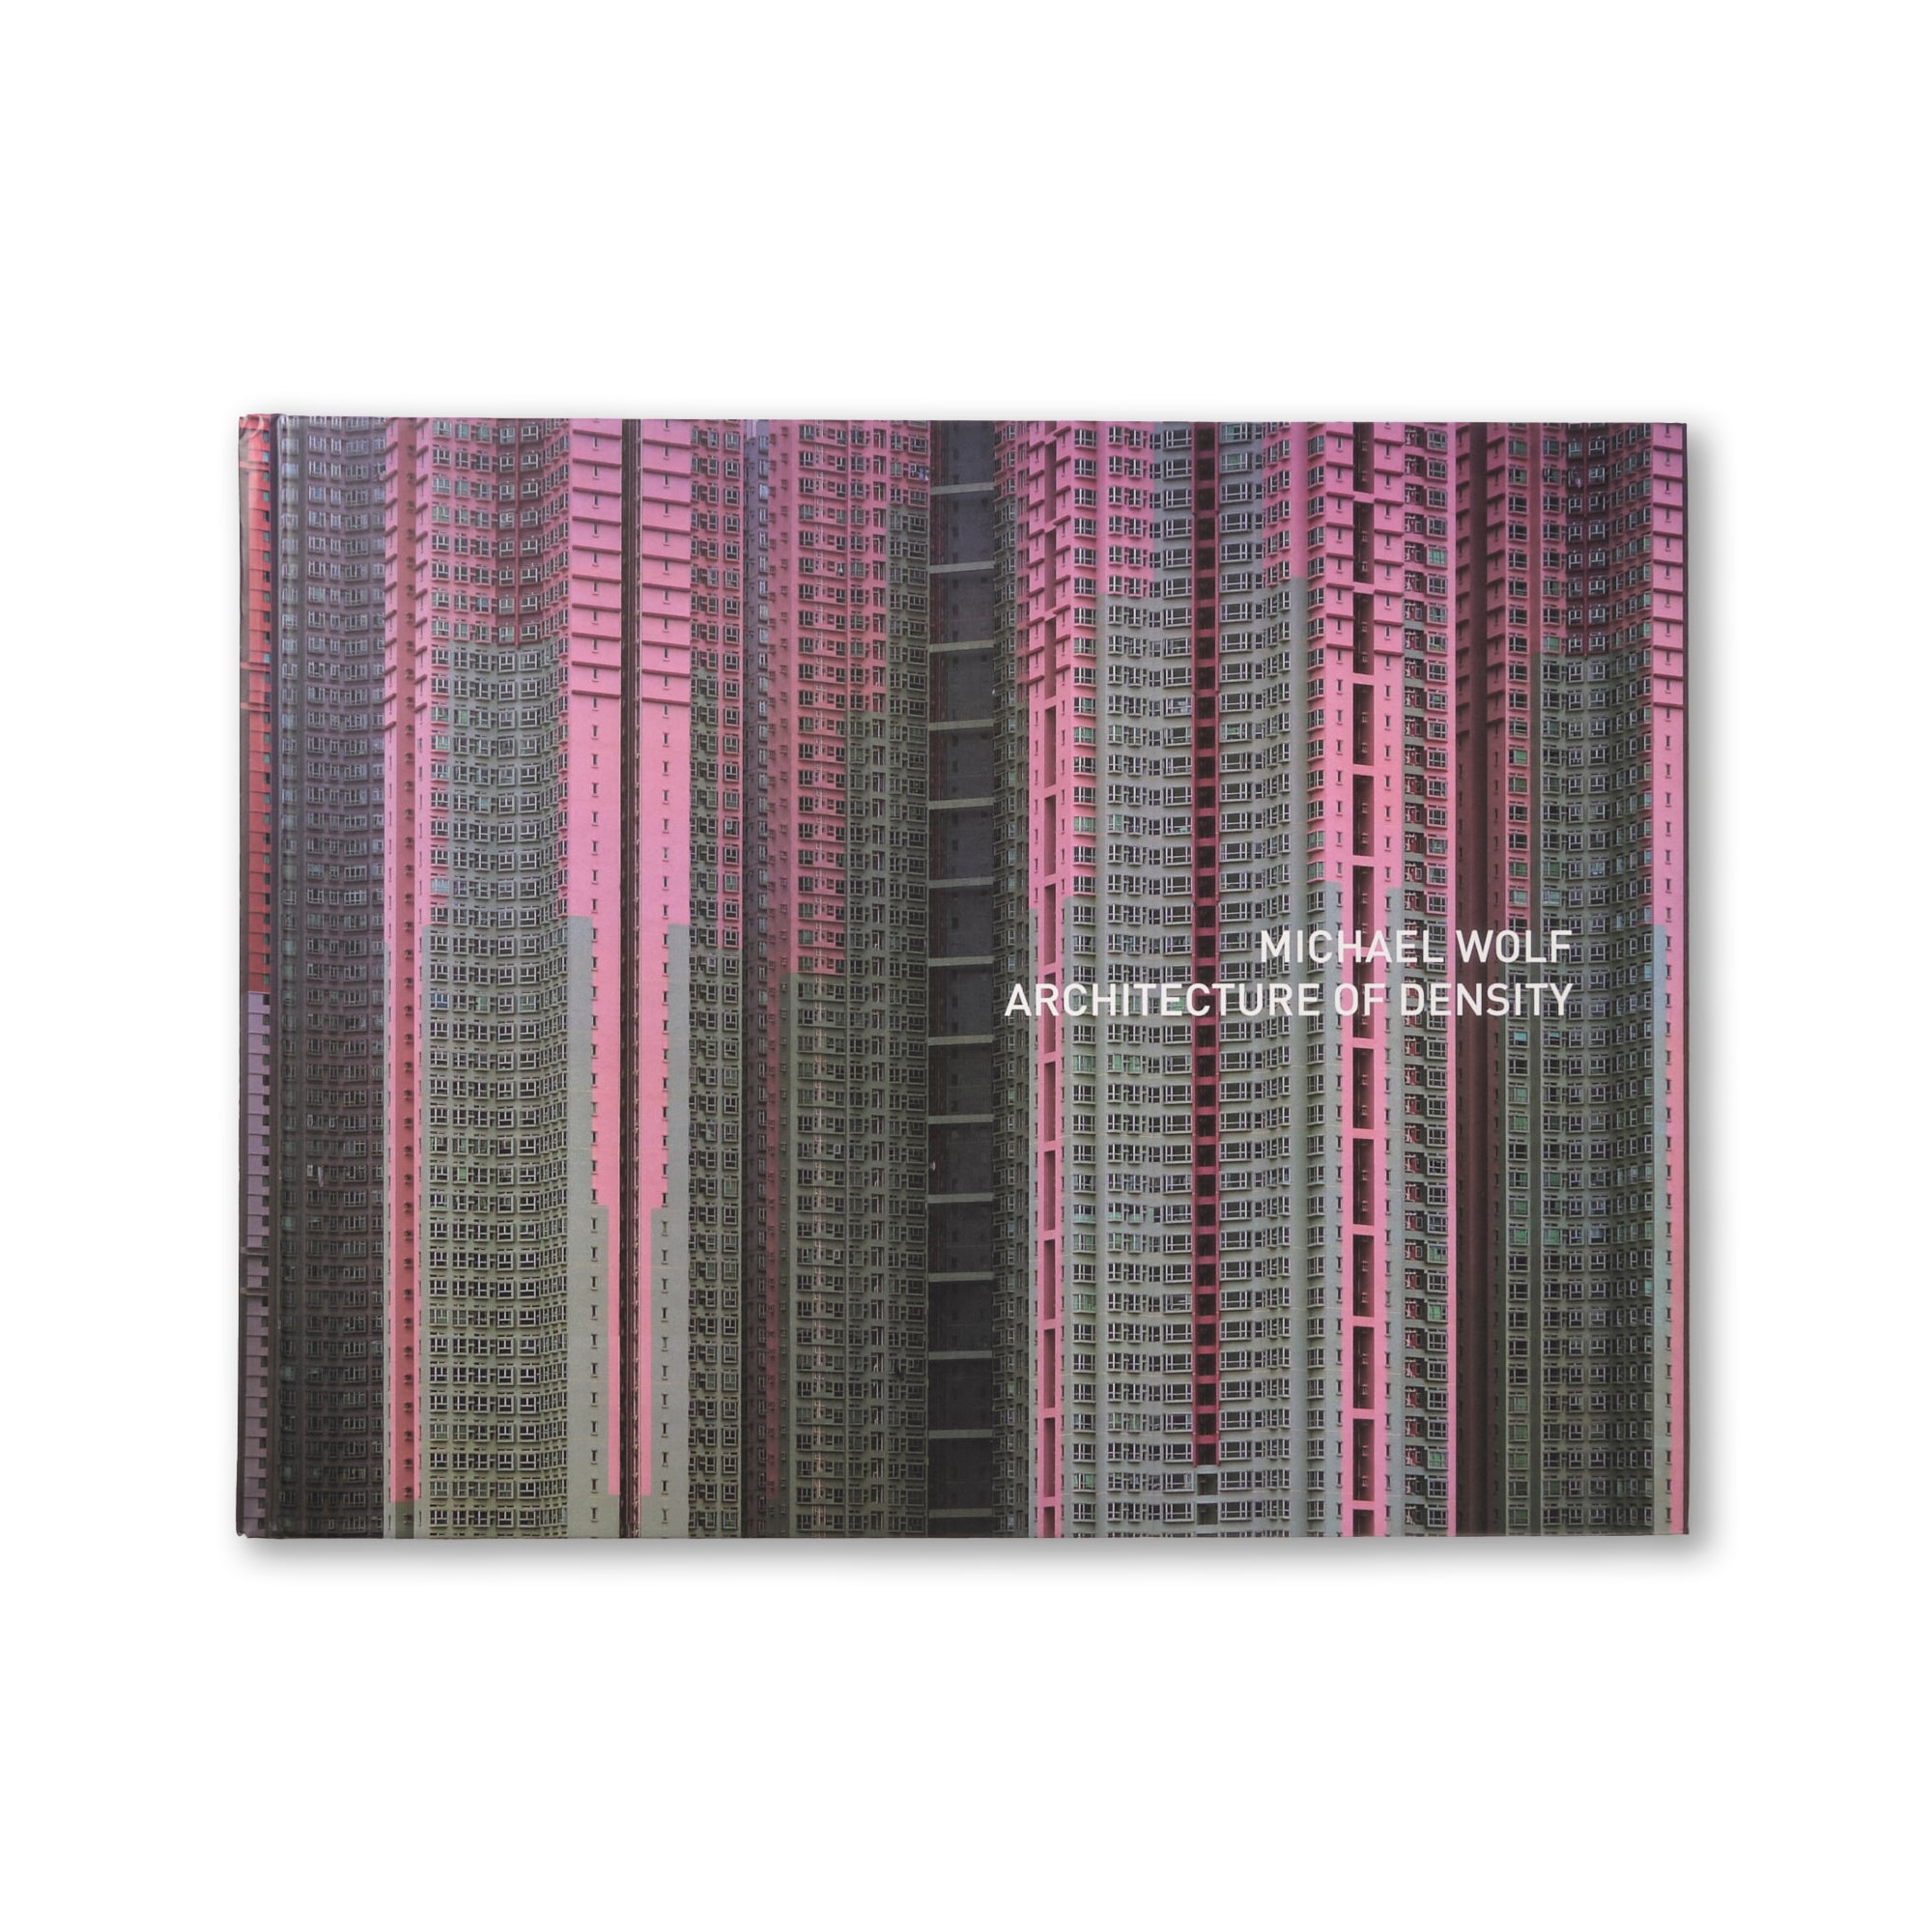 Michael Wolf – Architecture of Density